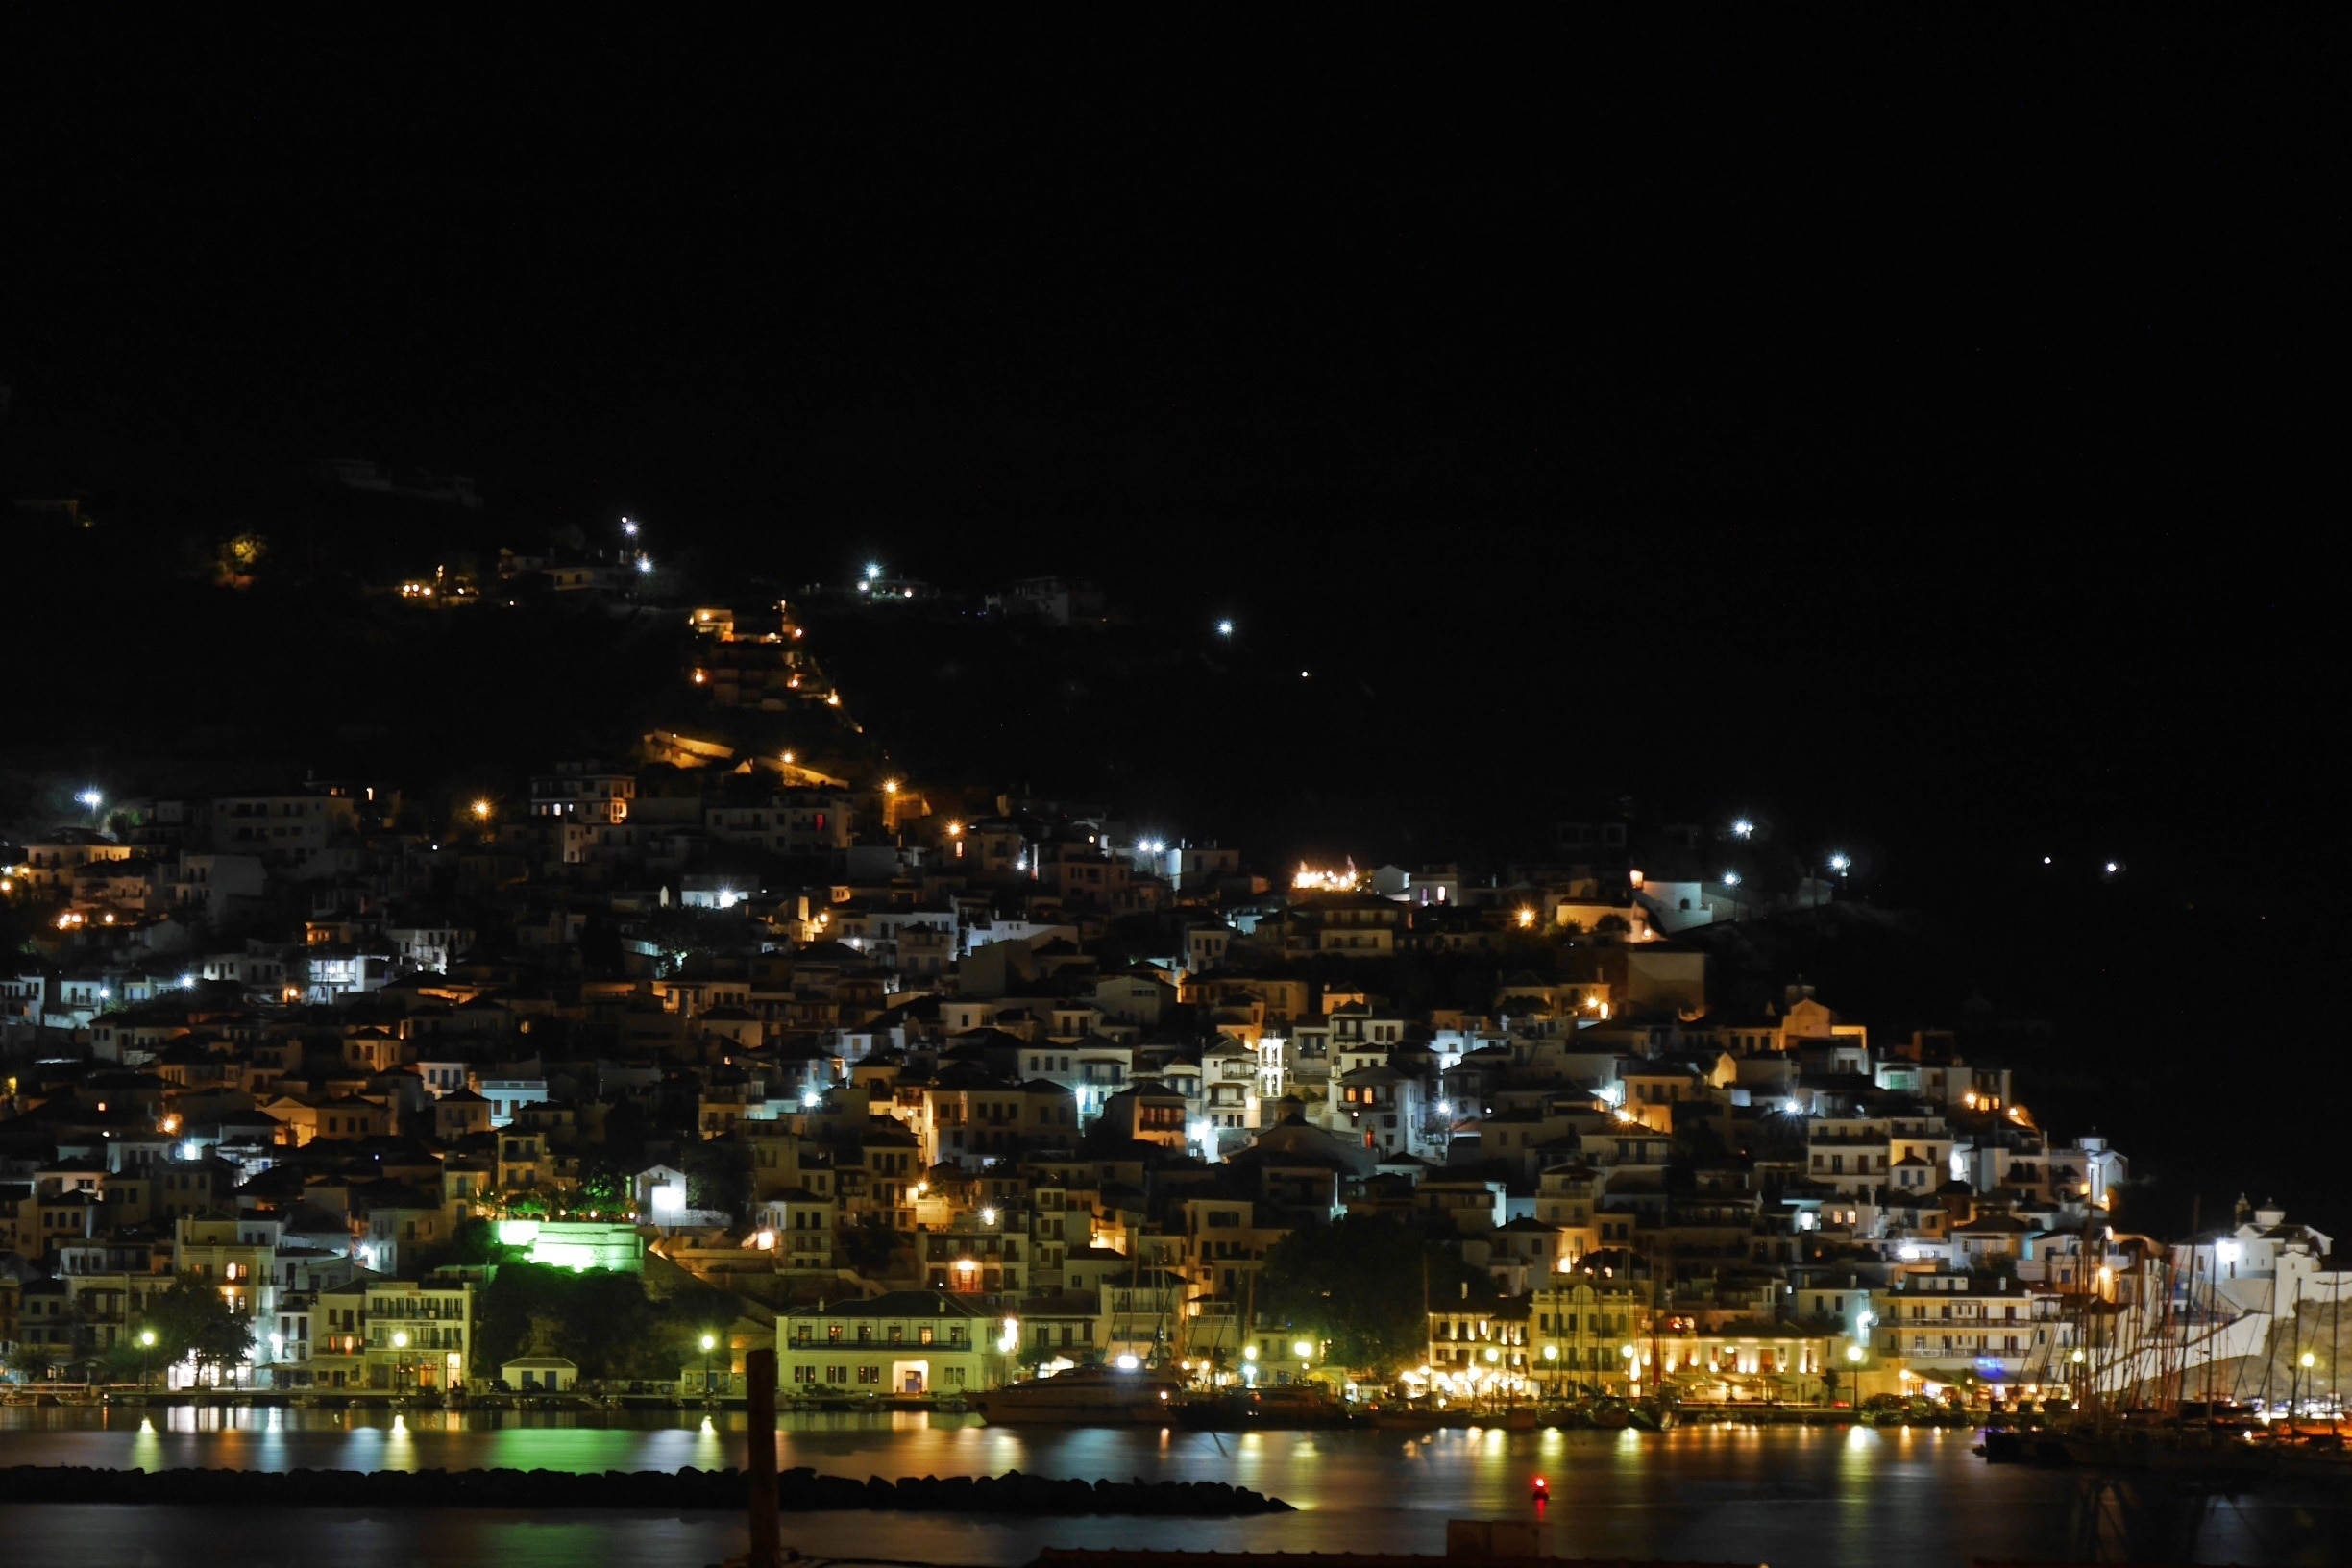 Skopelos Town by night.  Skopelos is a wonderful Greek island with an authentic feel and most certainly my favourite.  Reputed to be the greenest of all the Greek islands it is covered in pine forests.
It is also relatively unspoilt as it does not have an airport & is not the easiest island to get to.  Like nearly all the islands however it can get busy at the height of the summer.
The main town tumbles down to the harbour through a mass of narrow streets where rubbish is still collected by mule. The tavernas abound with live music & several well known Greek musicians live and/or perform regularly here.